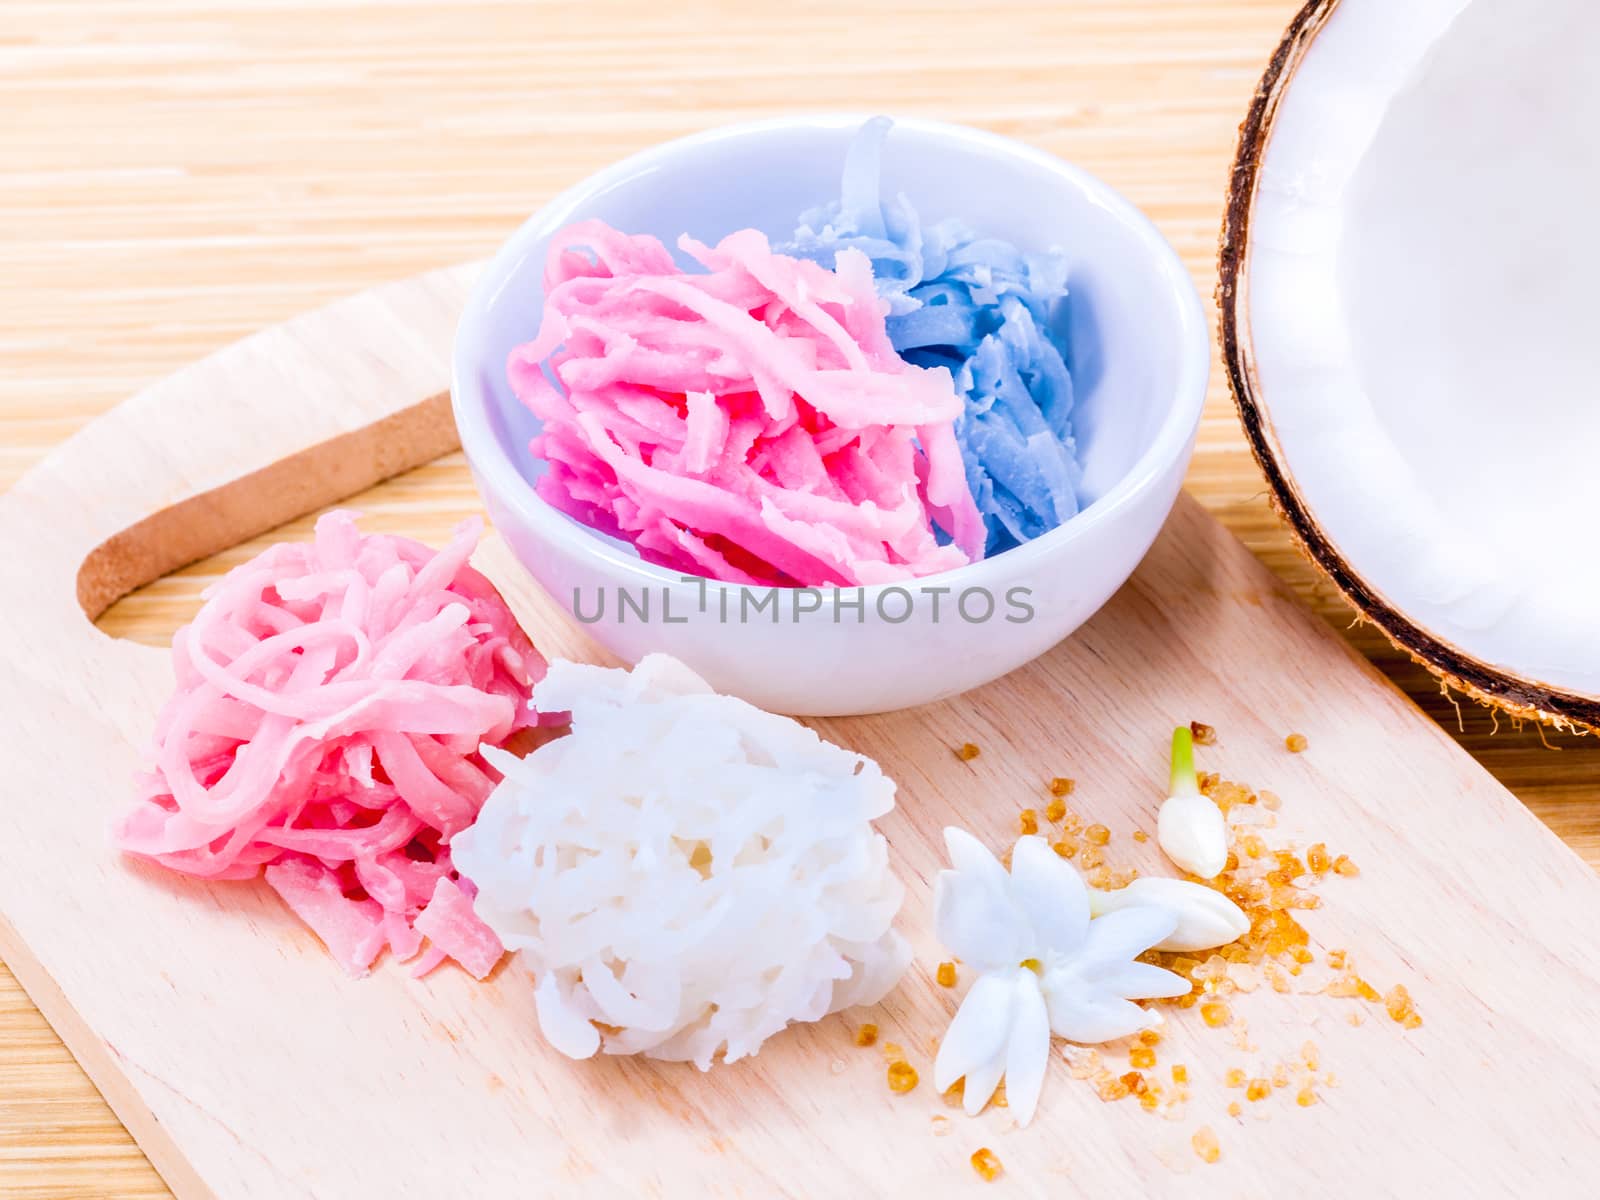 A colorful traditional coconut dessert made from grated coconut and sugar .